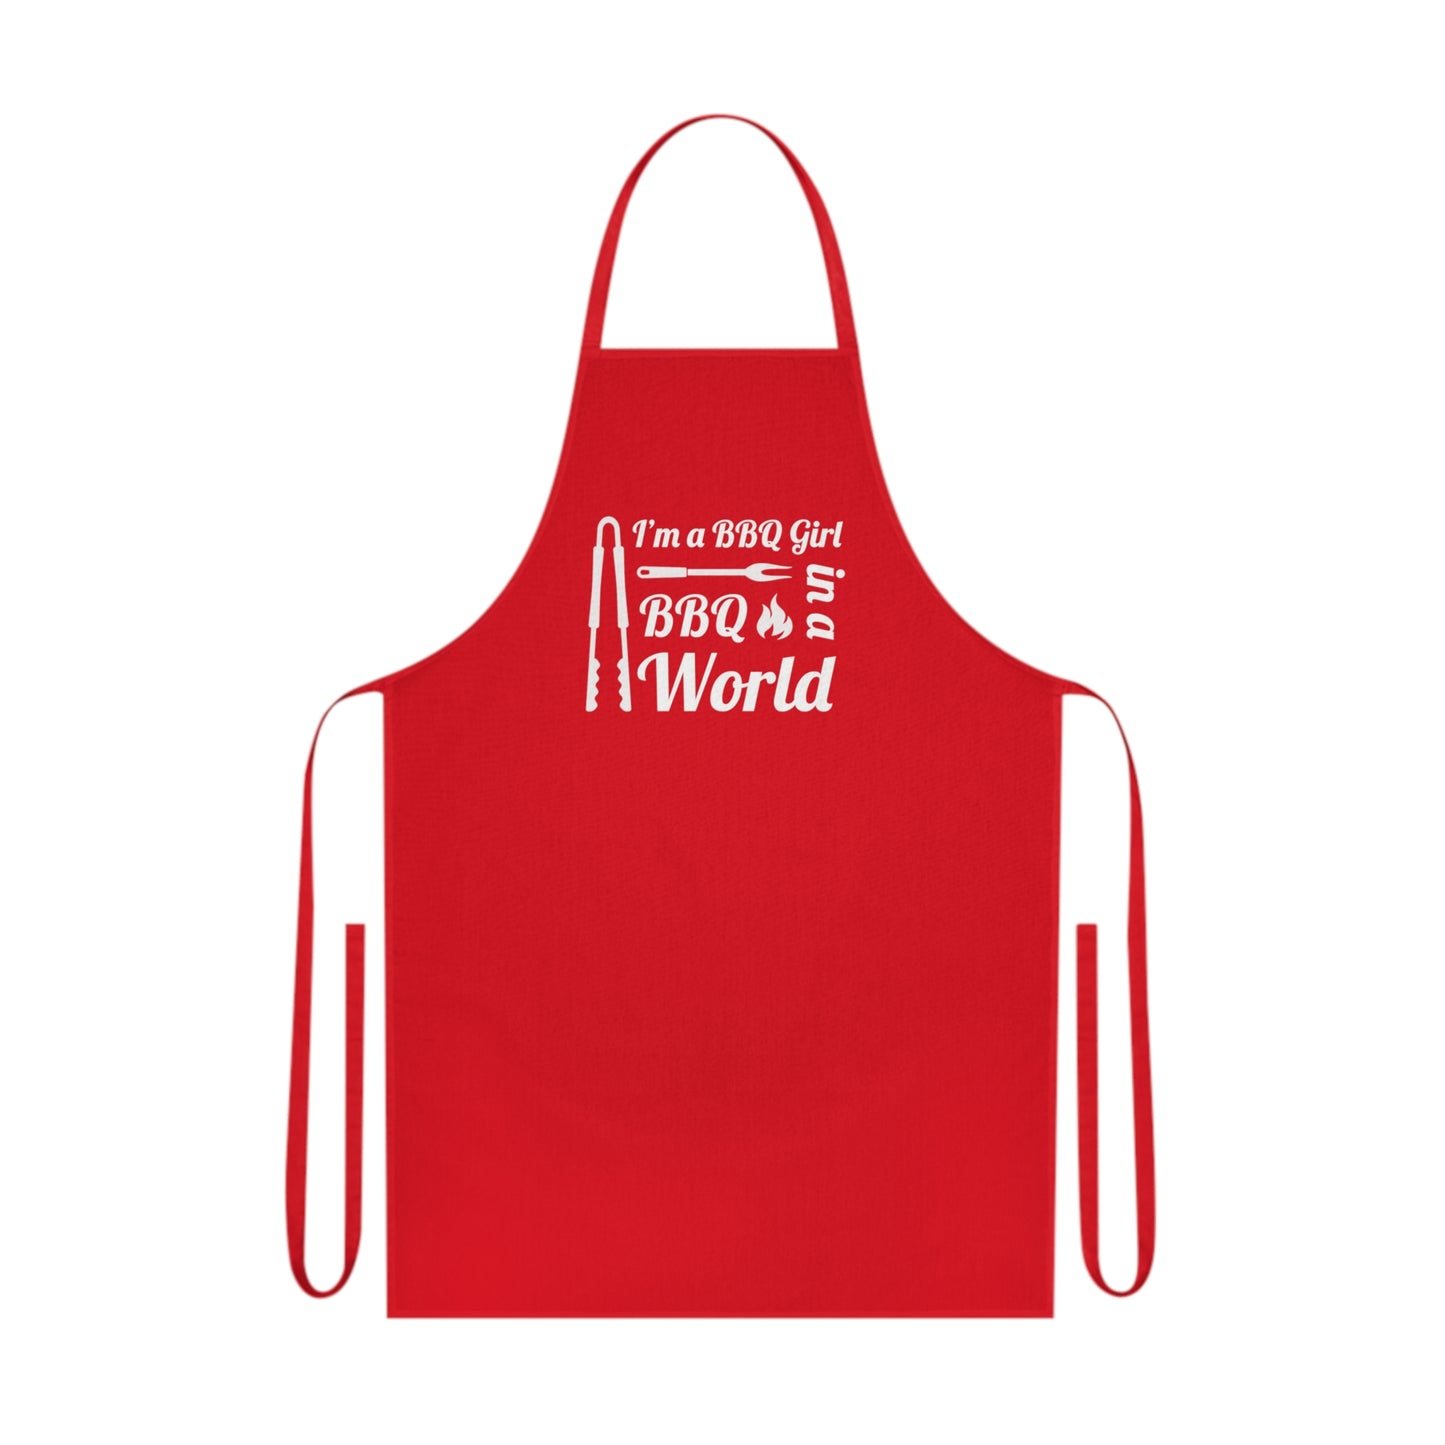 I'm A BBQ Girl in a BBQ World, Cotton Apron